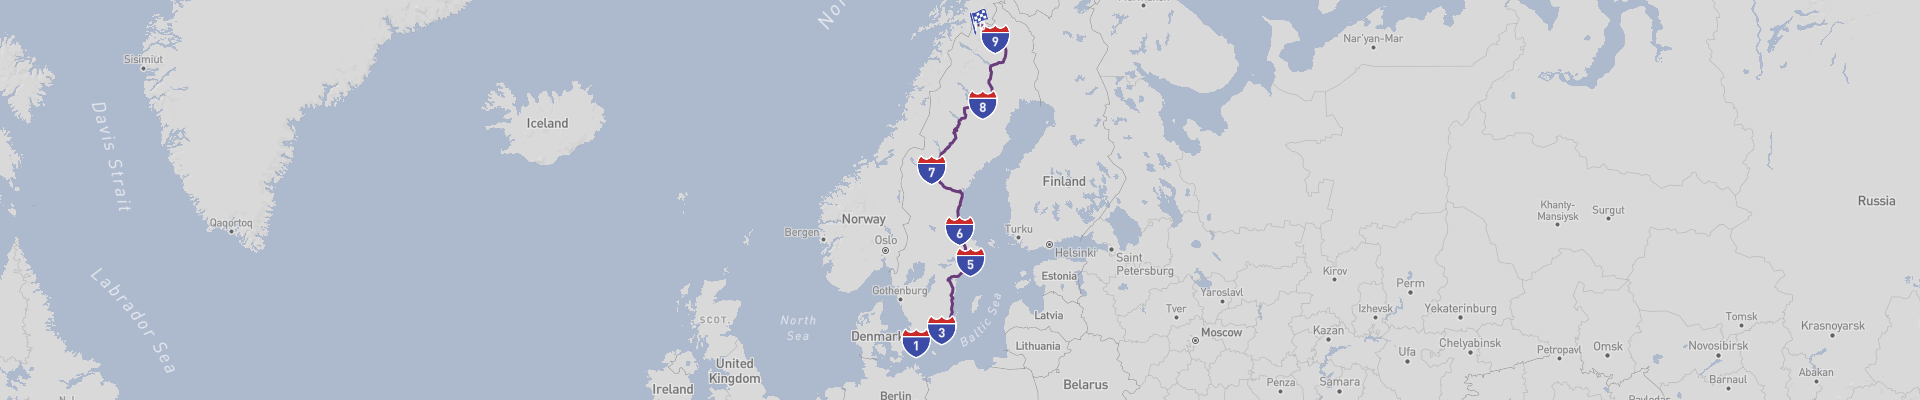 Into the Sweden's North Road Trip